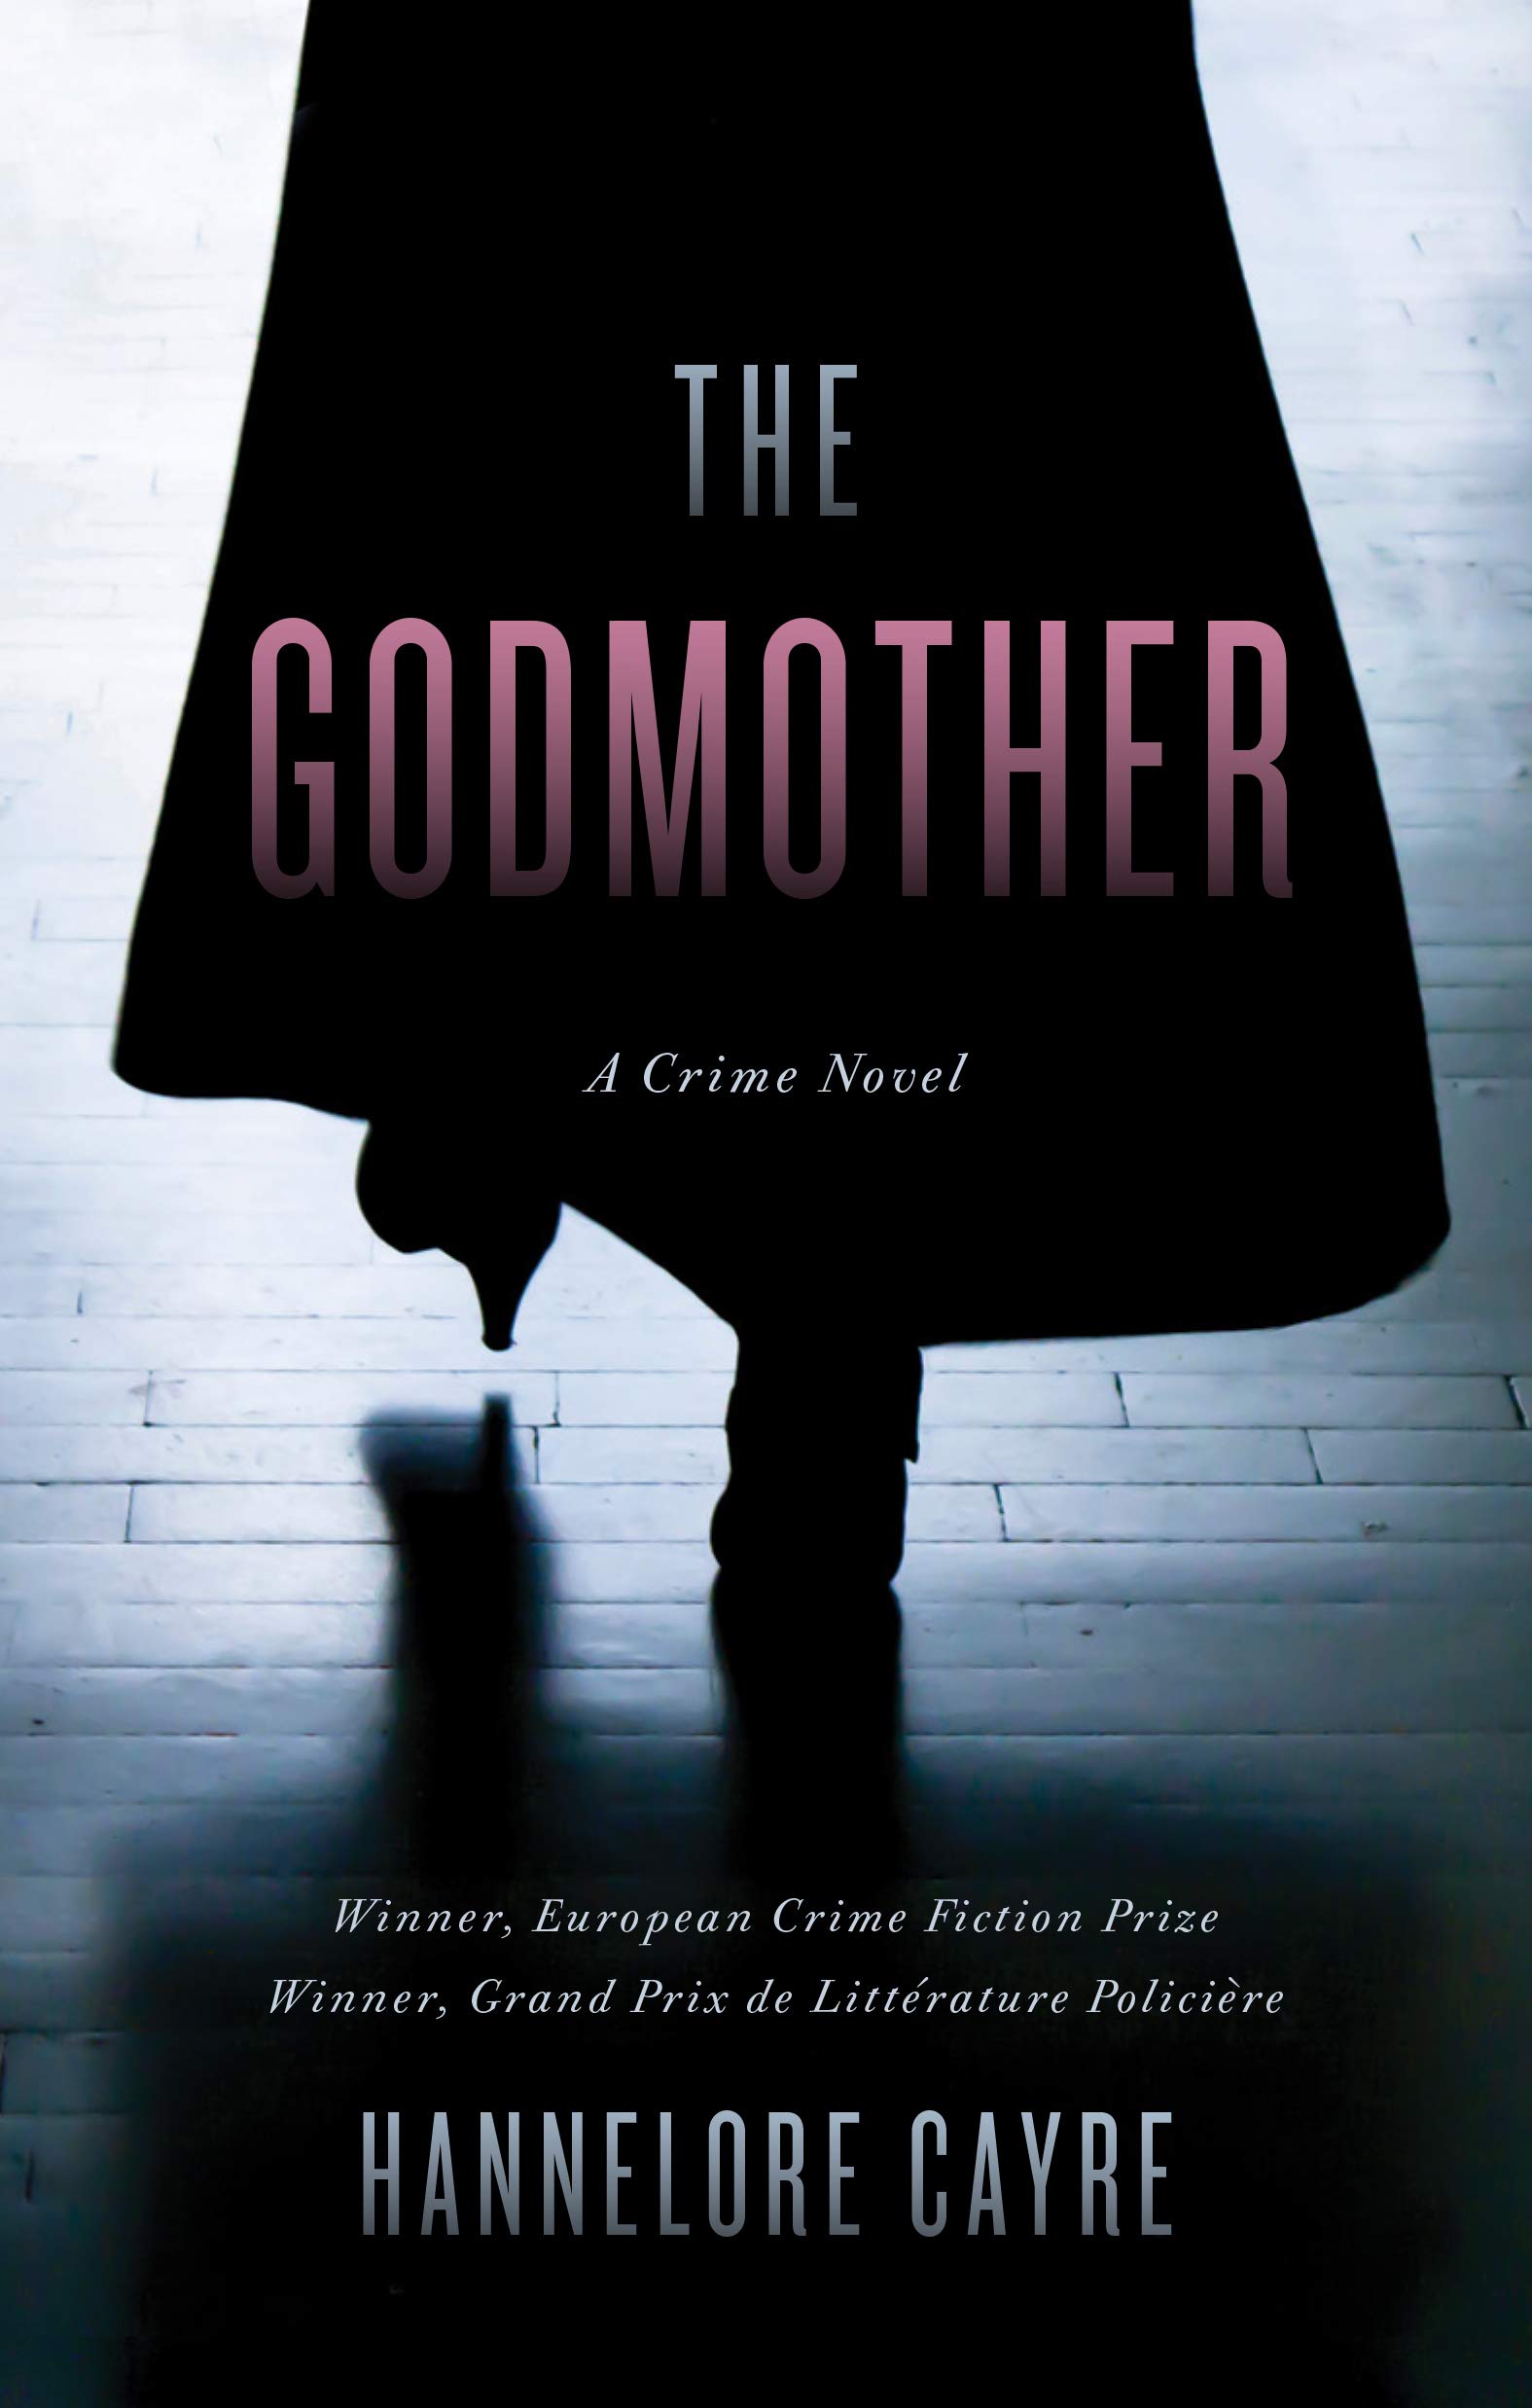 The Godmother by Hannelore Cayre.